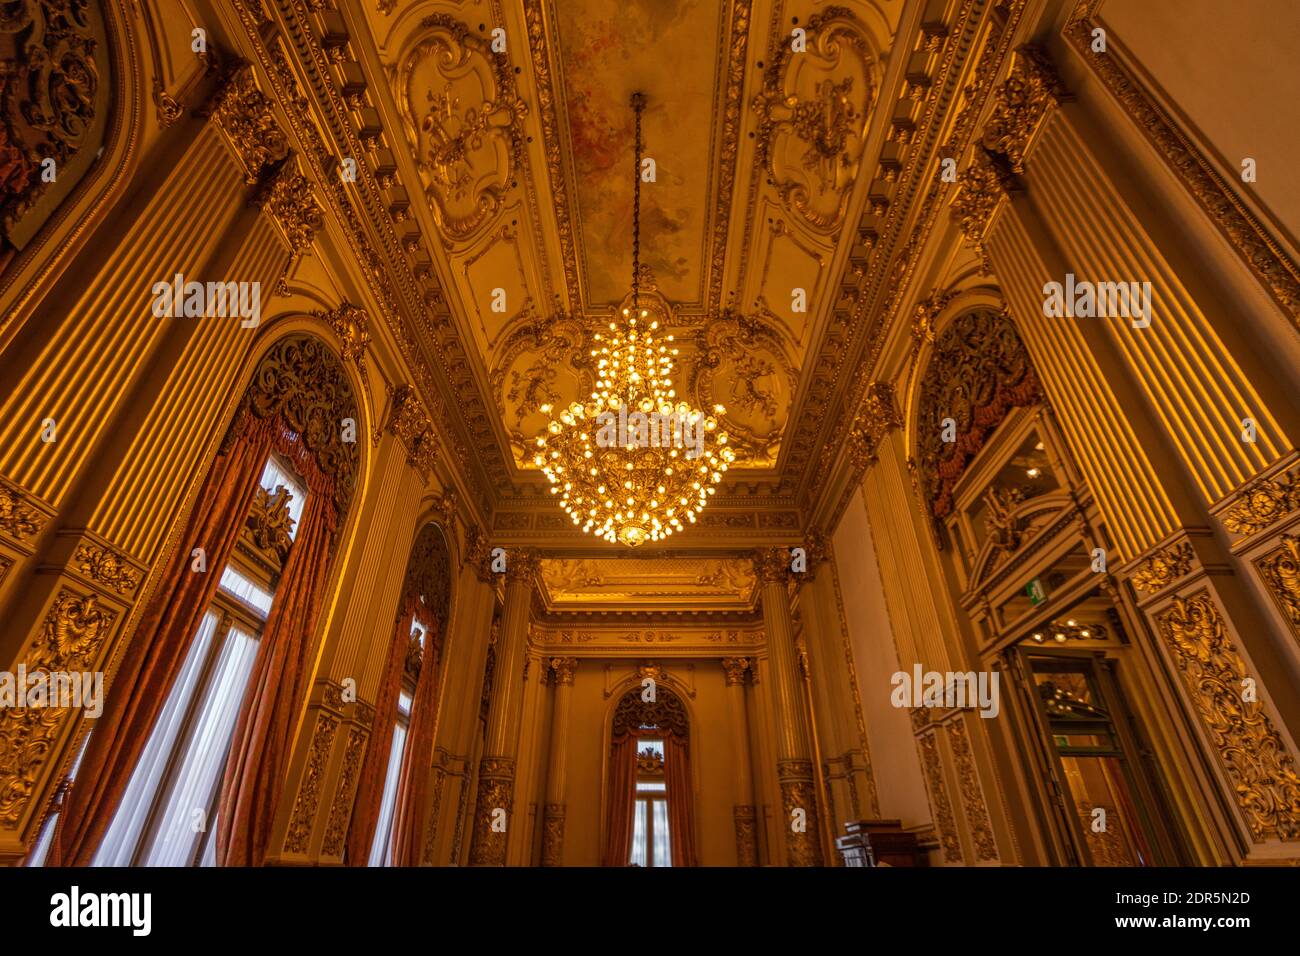 Ceiling inside Teatro Colon in Buenos Aires Stock Photo